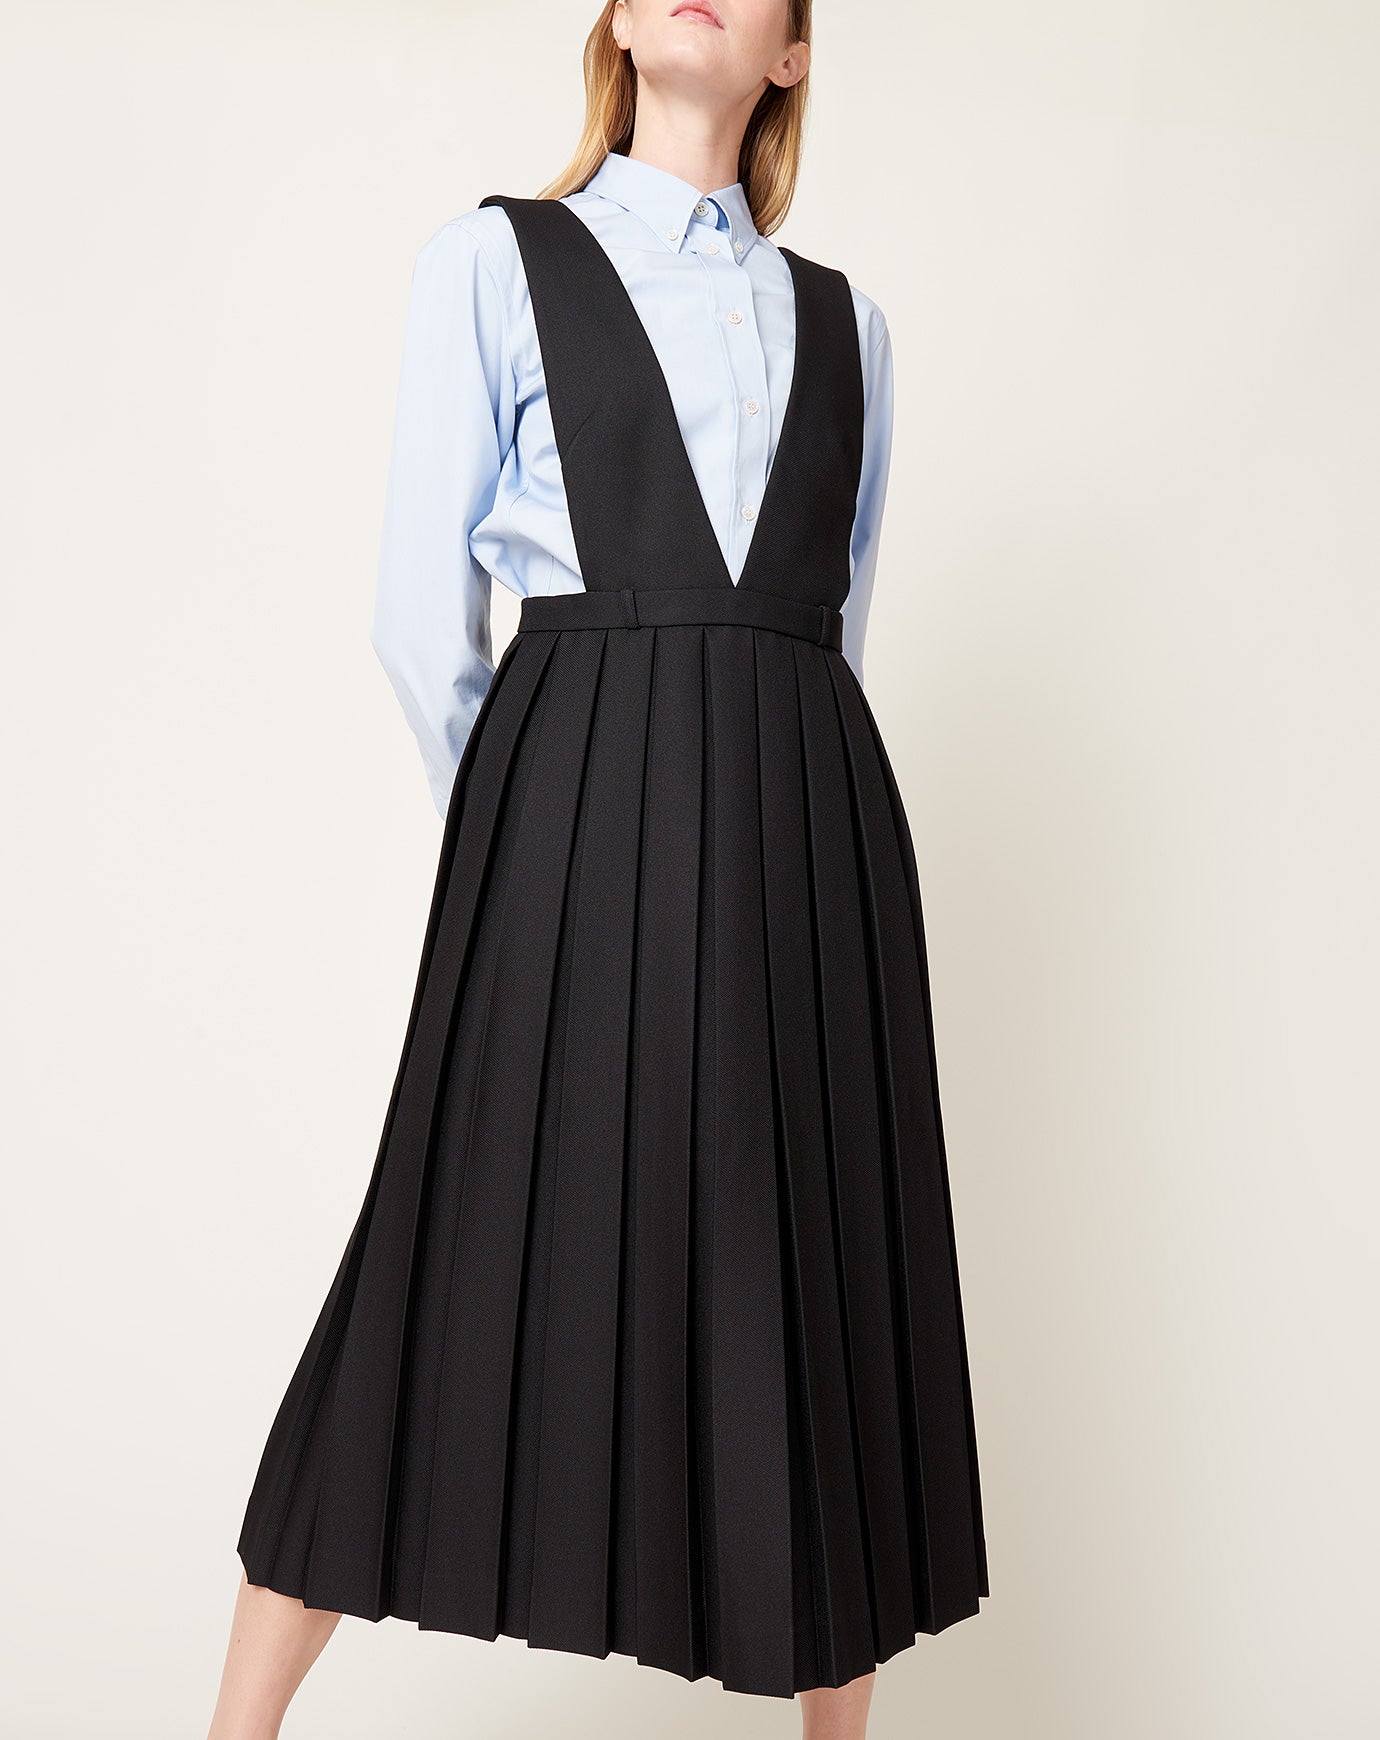 Sandy Liang Odeon Pinafore in Black